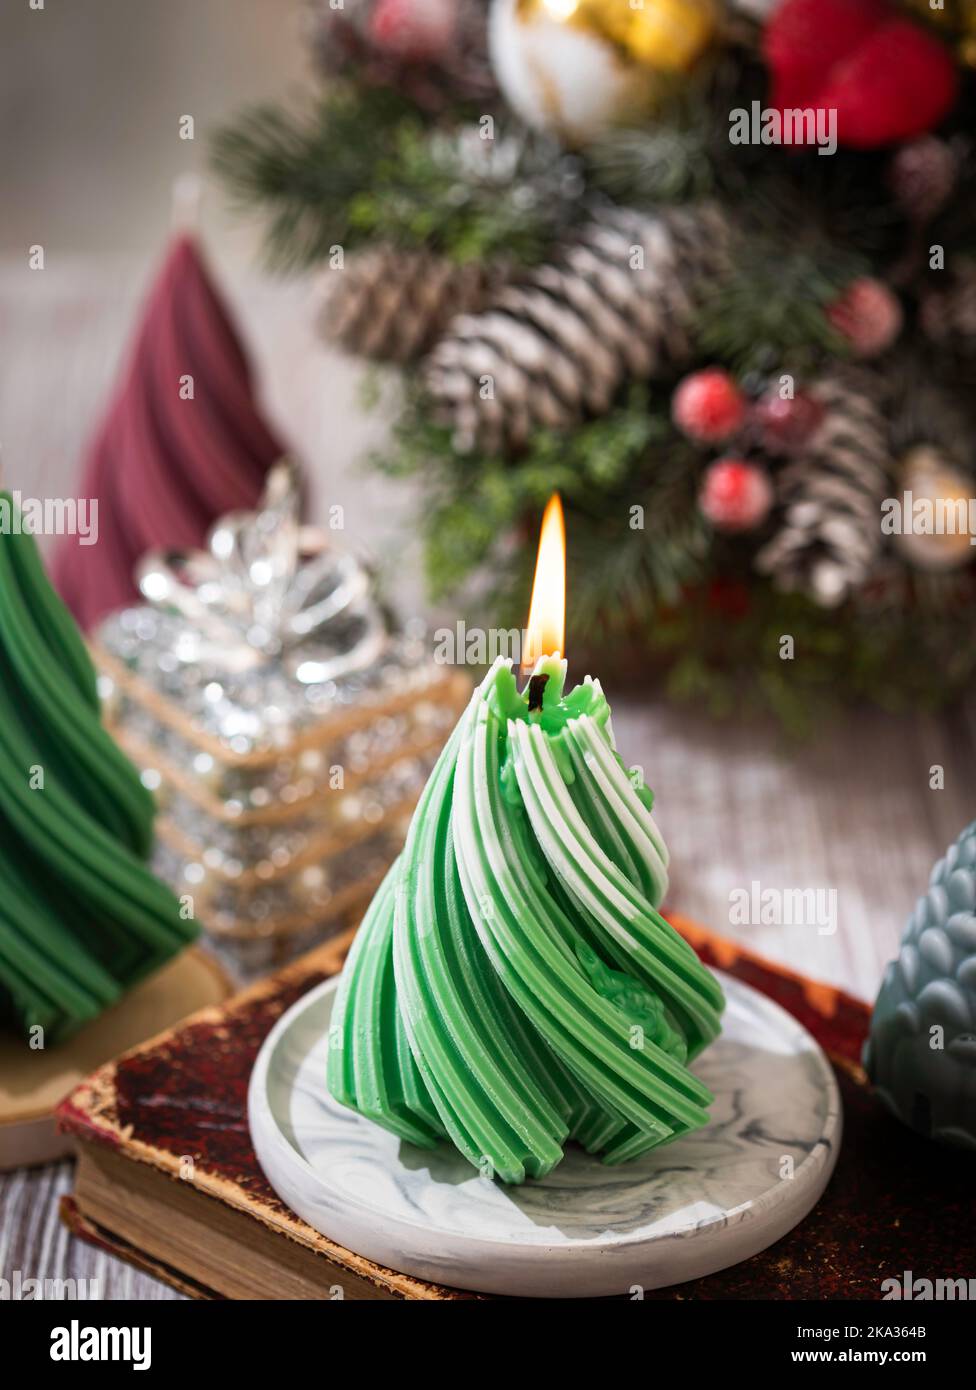 Christmas Candle. New Year's composition with candle in the shape of a Christmas tree. Burning wax candle in shape of fir tree with. Copy space Stock Photo